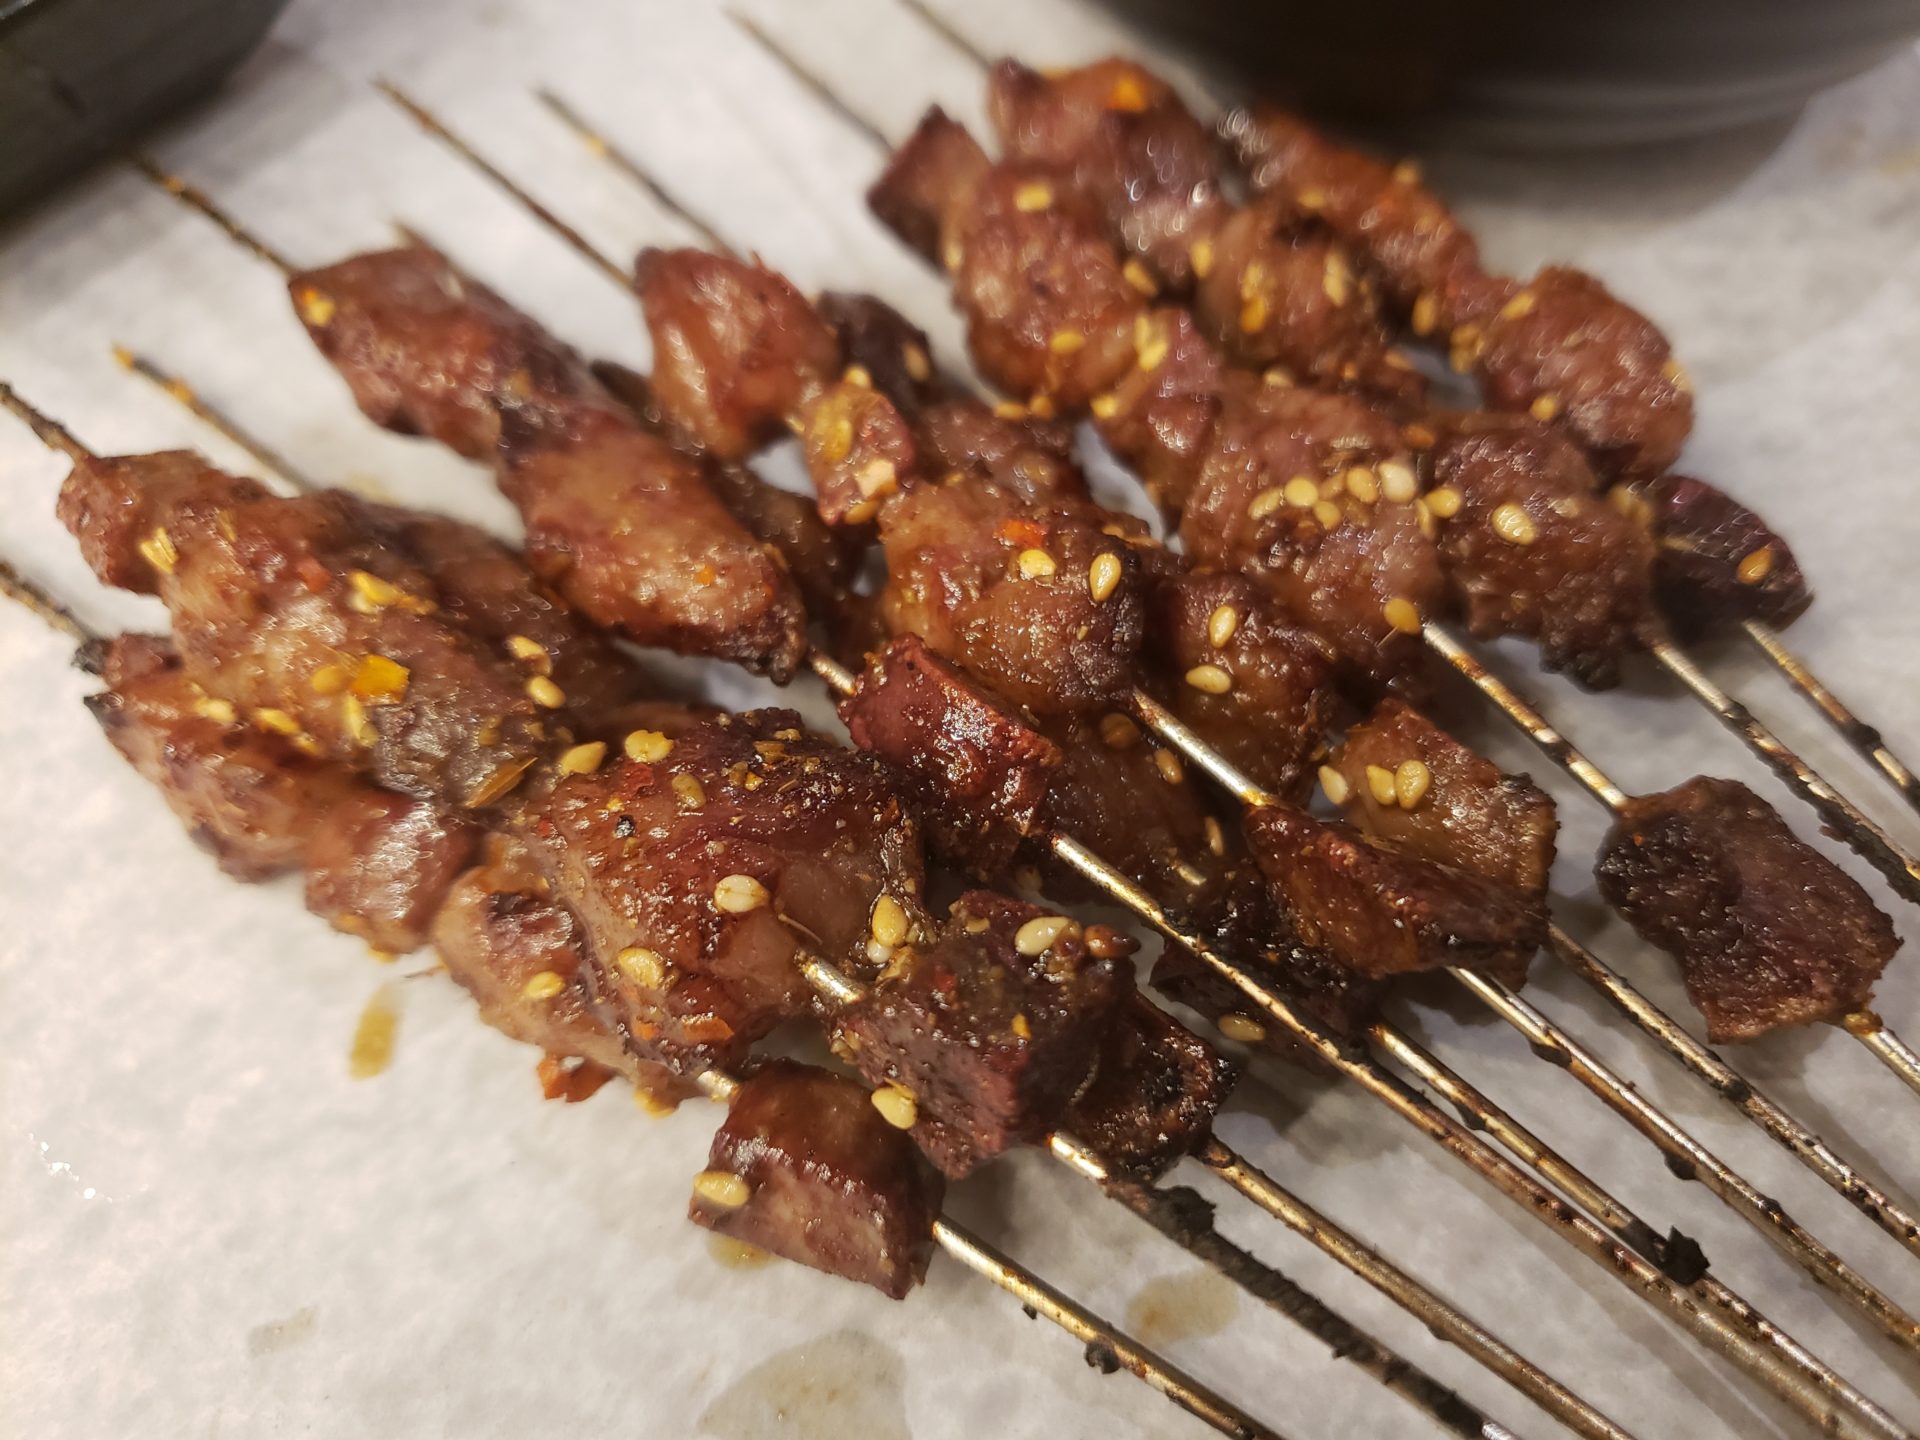 skewers of meat on a white surface